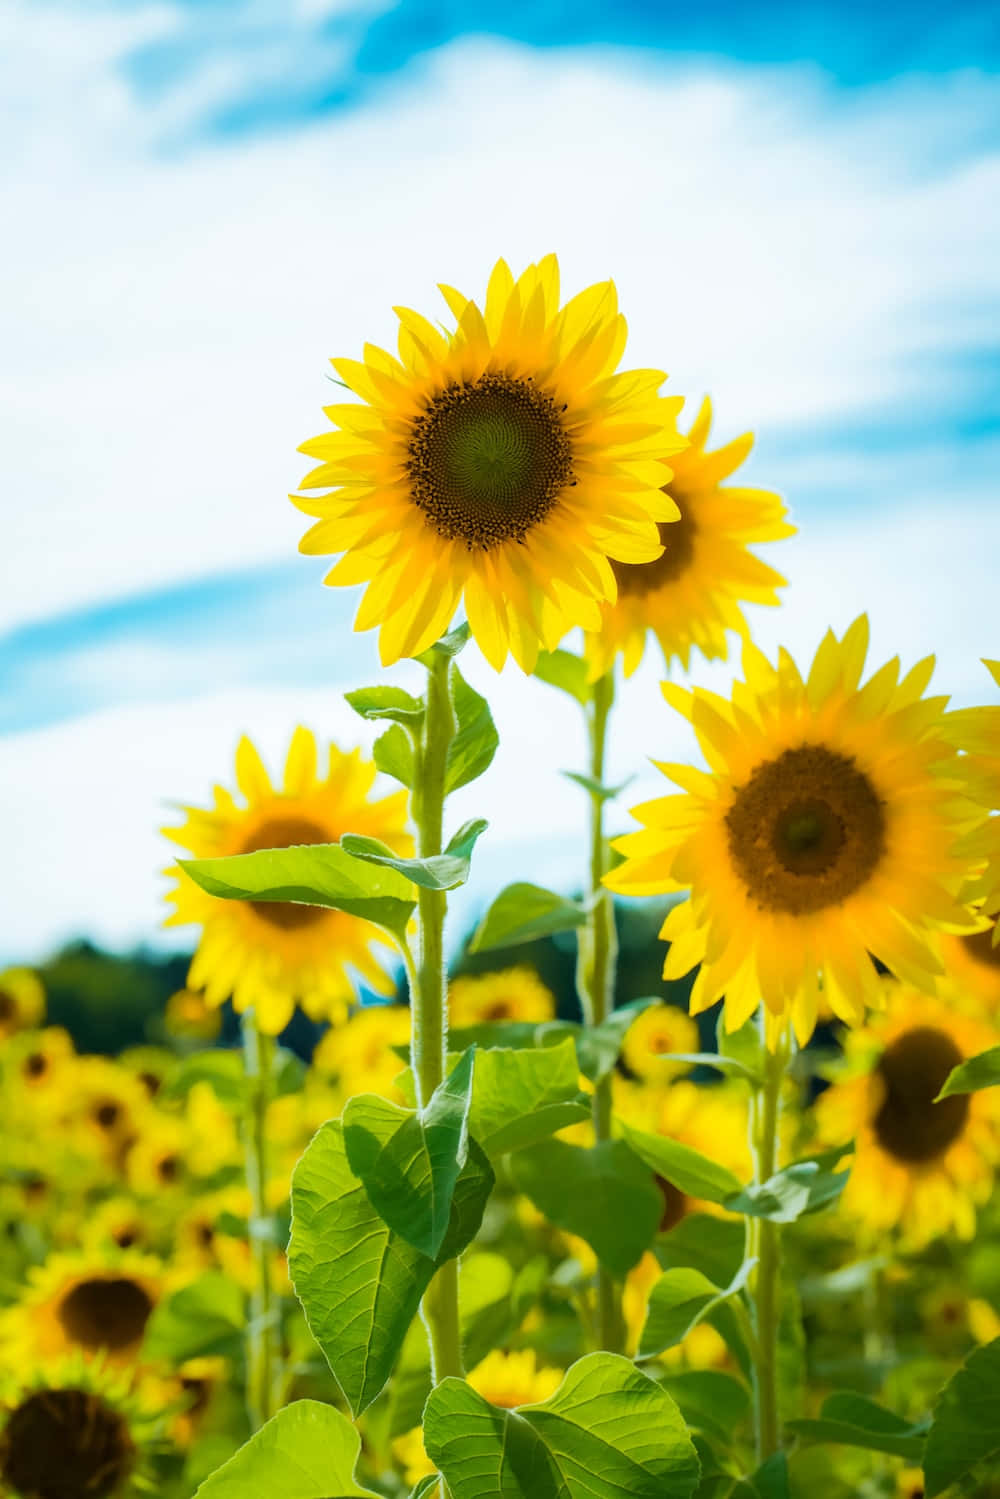 A cheerful sunflower spreads joy and sunshine in a vibrant garden.